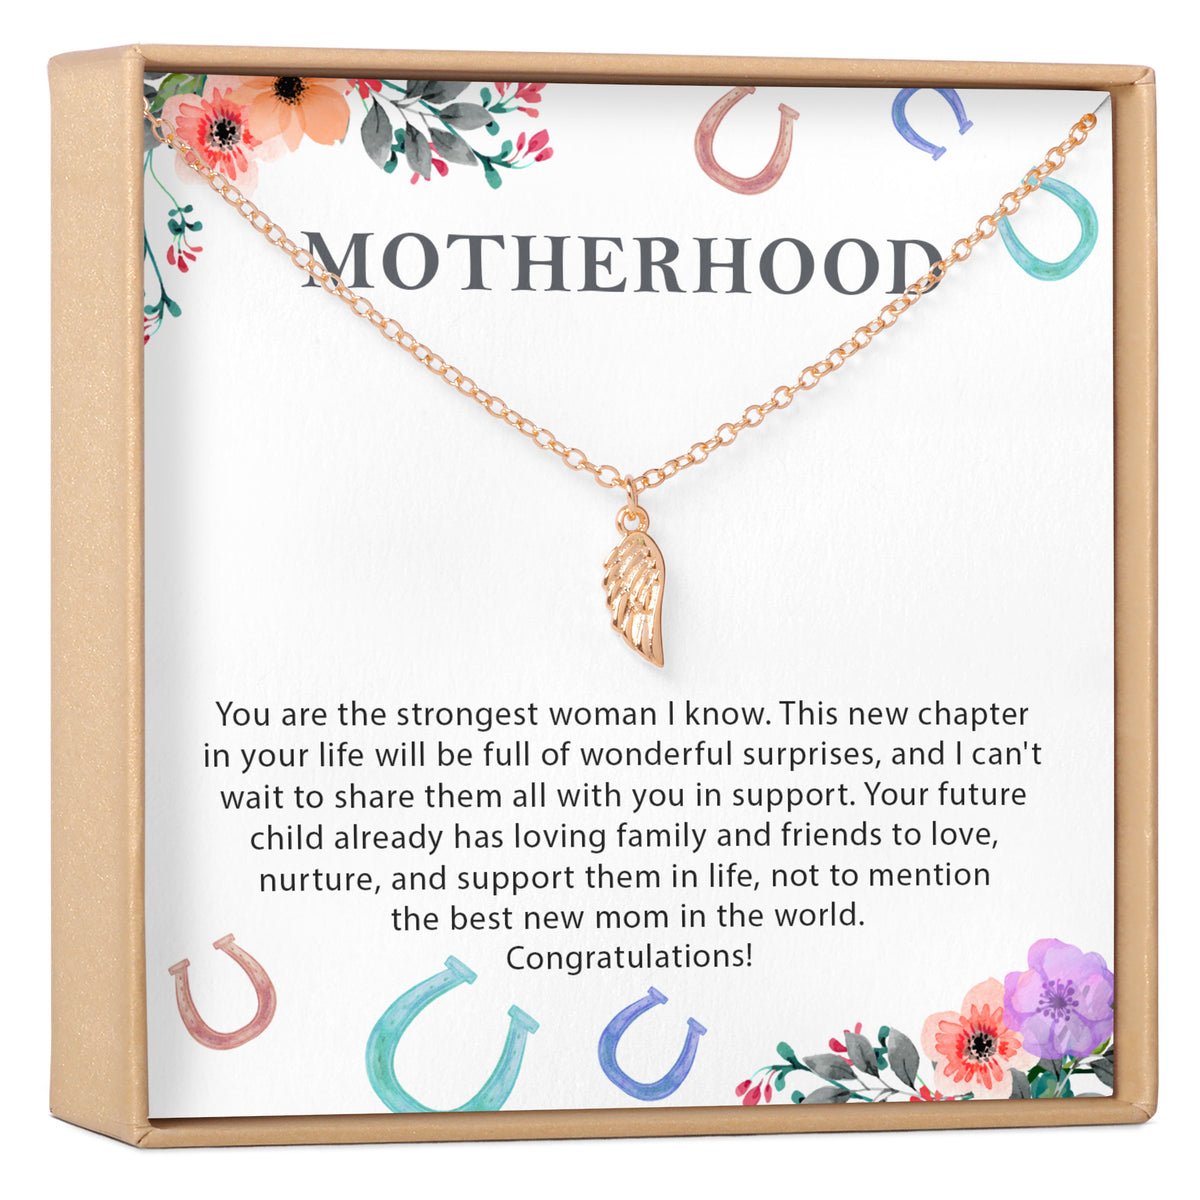 Mom to Be Necklace